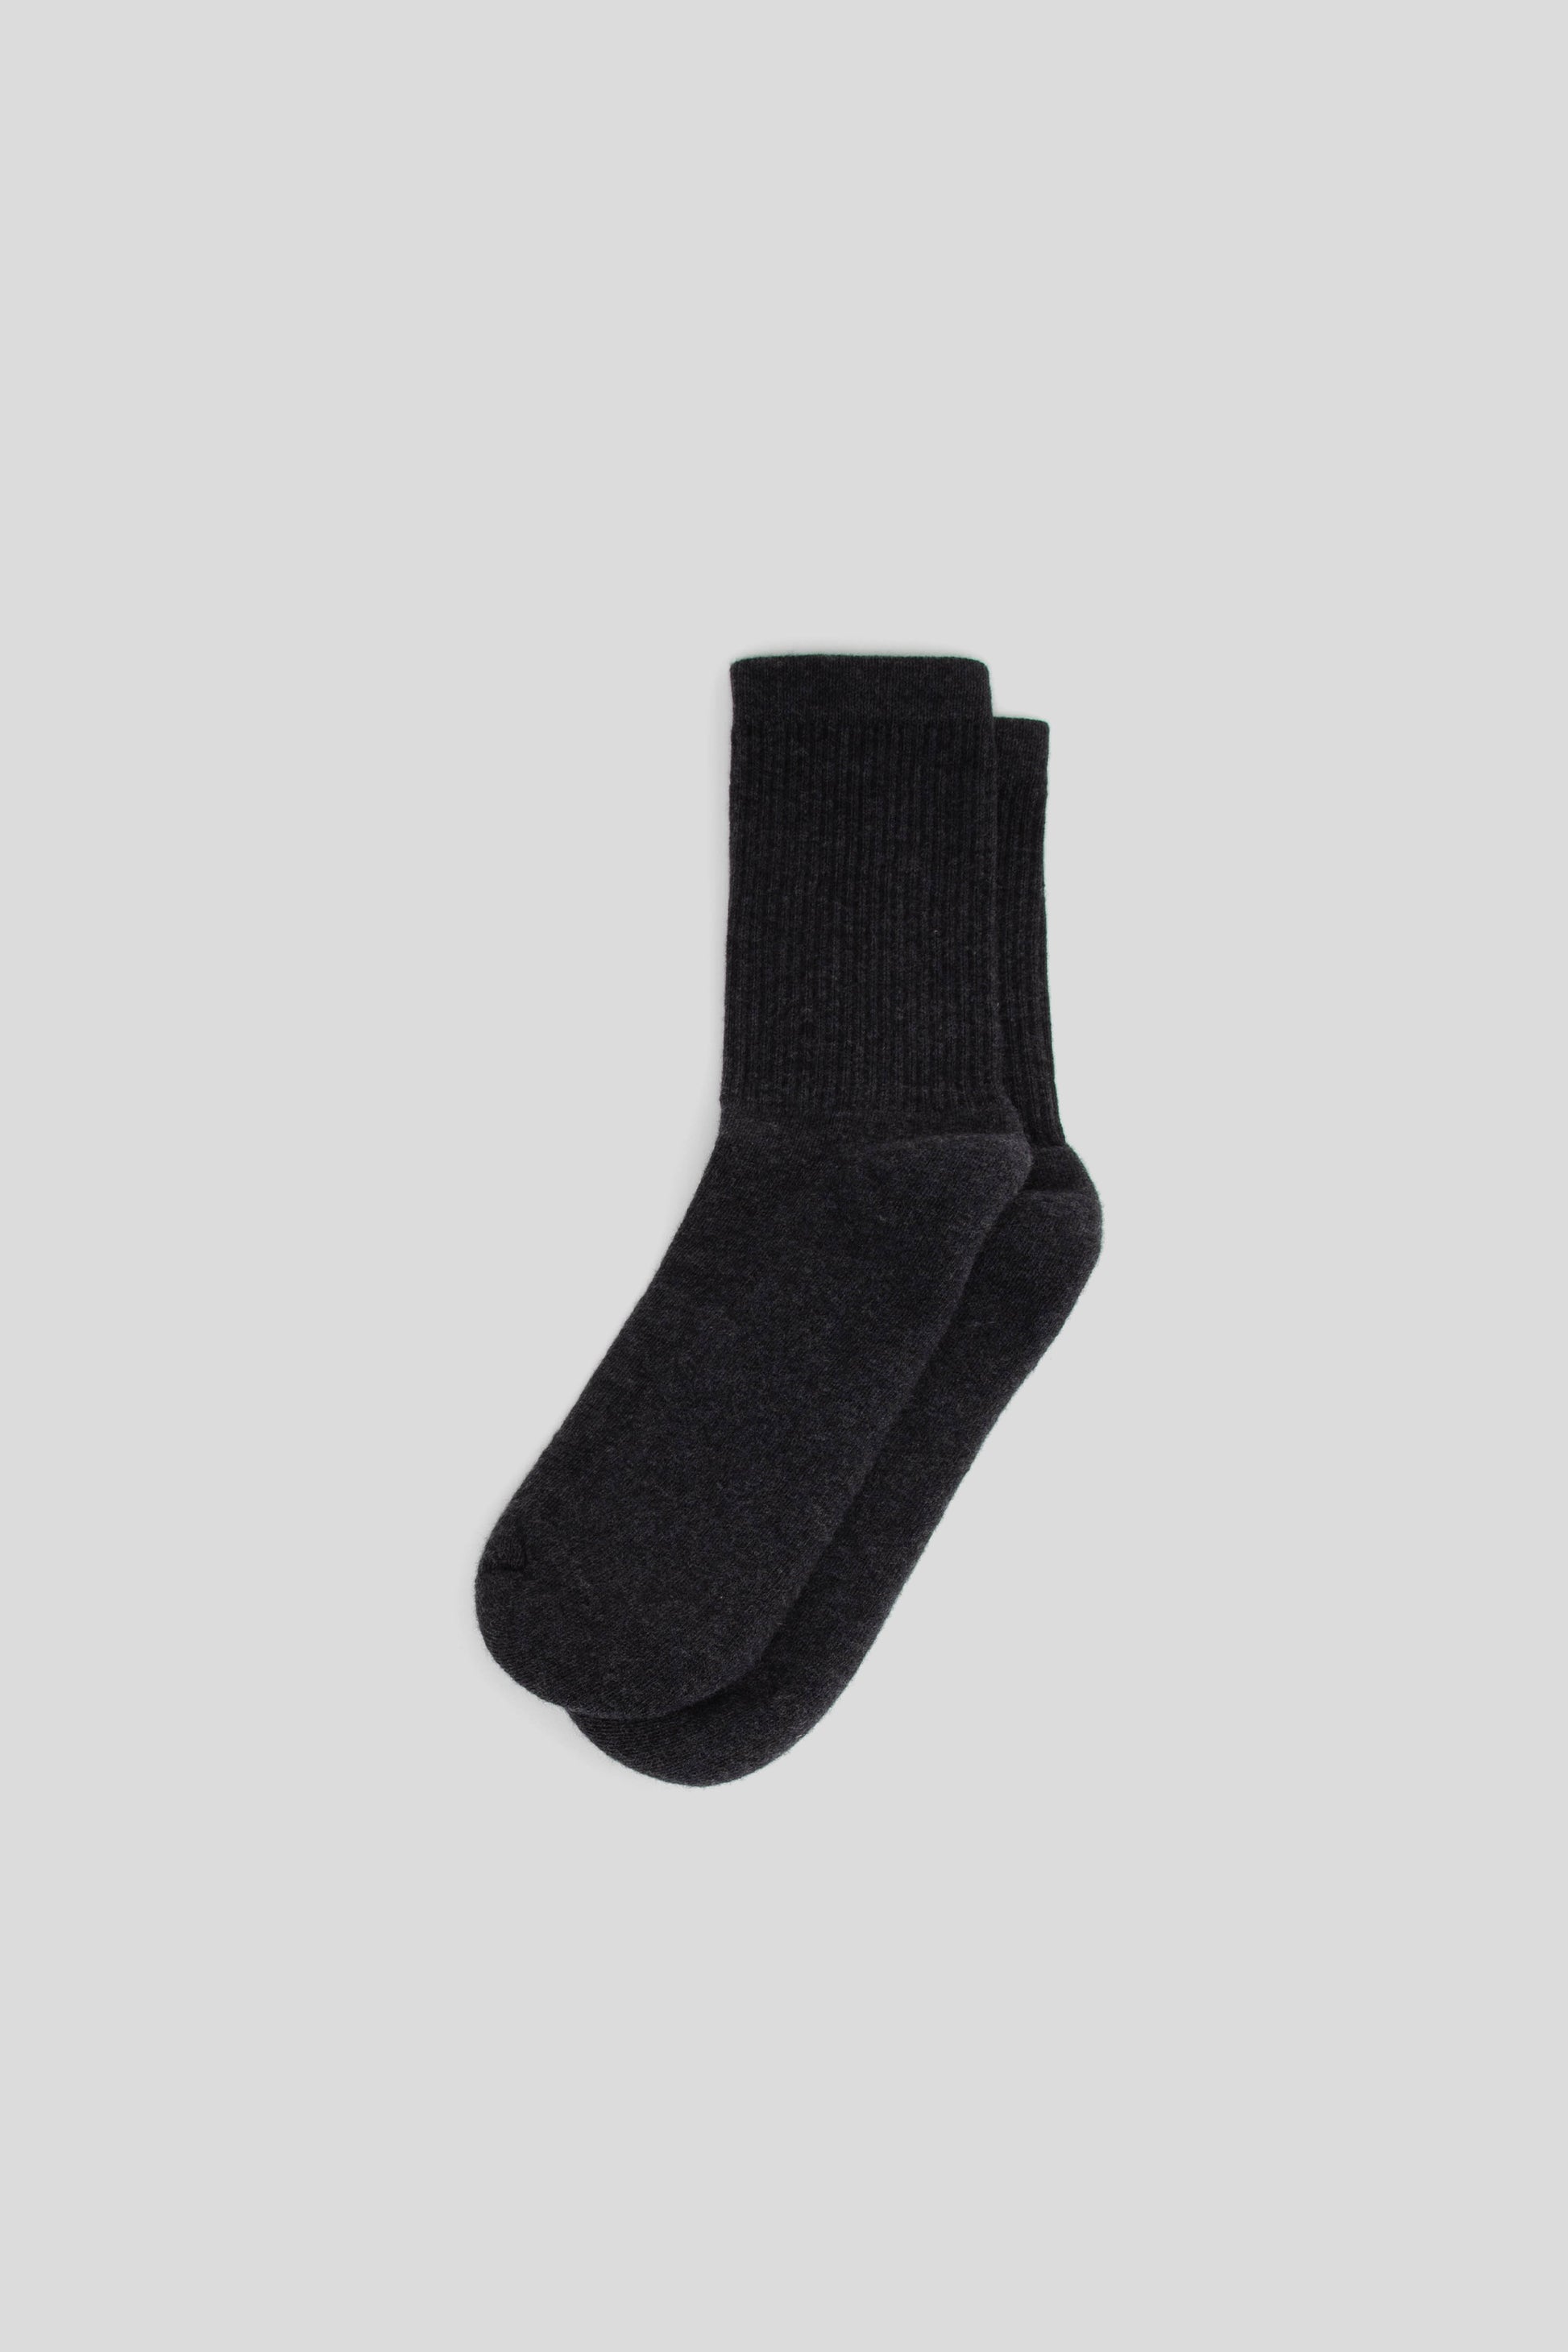 American Trench Supermerino Crew Sock in Charcoal